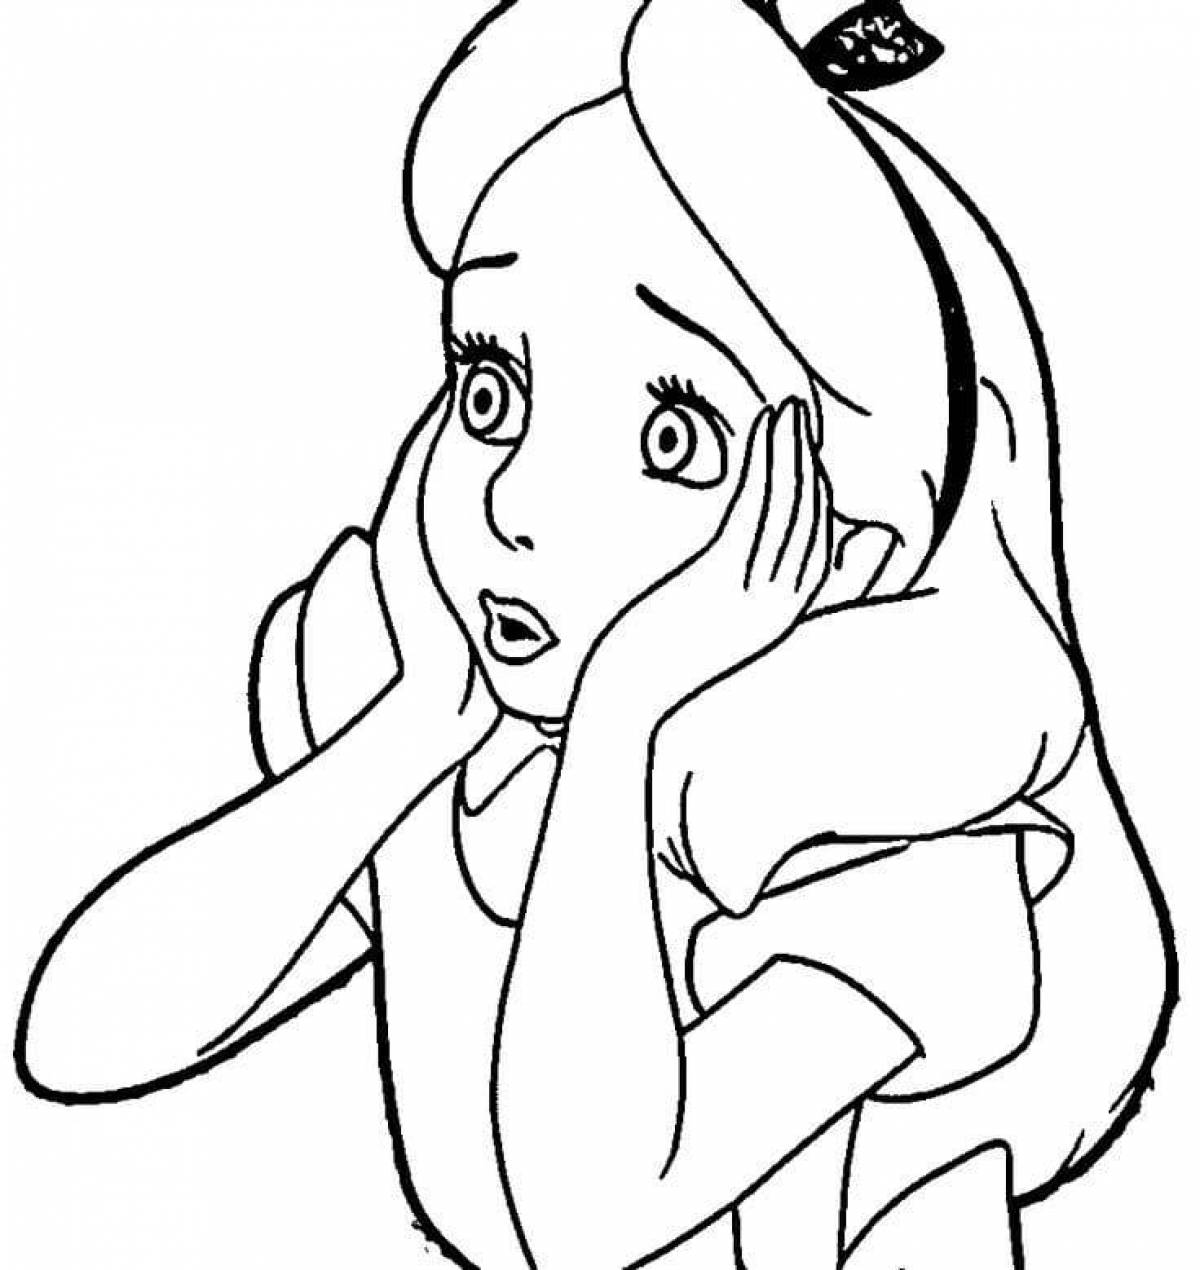 Glowing alice coloring page